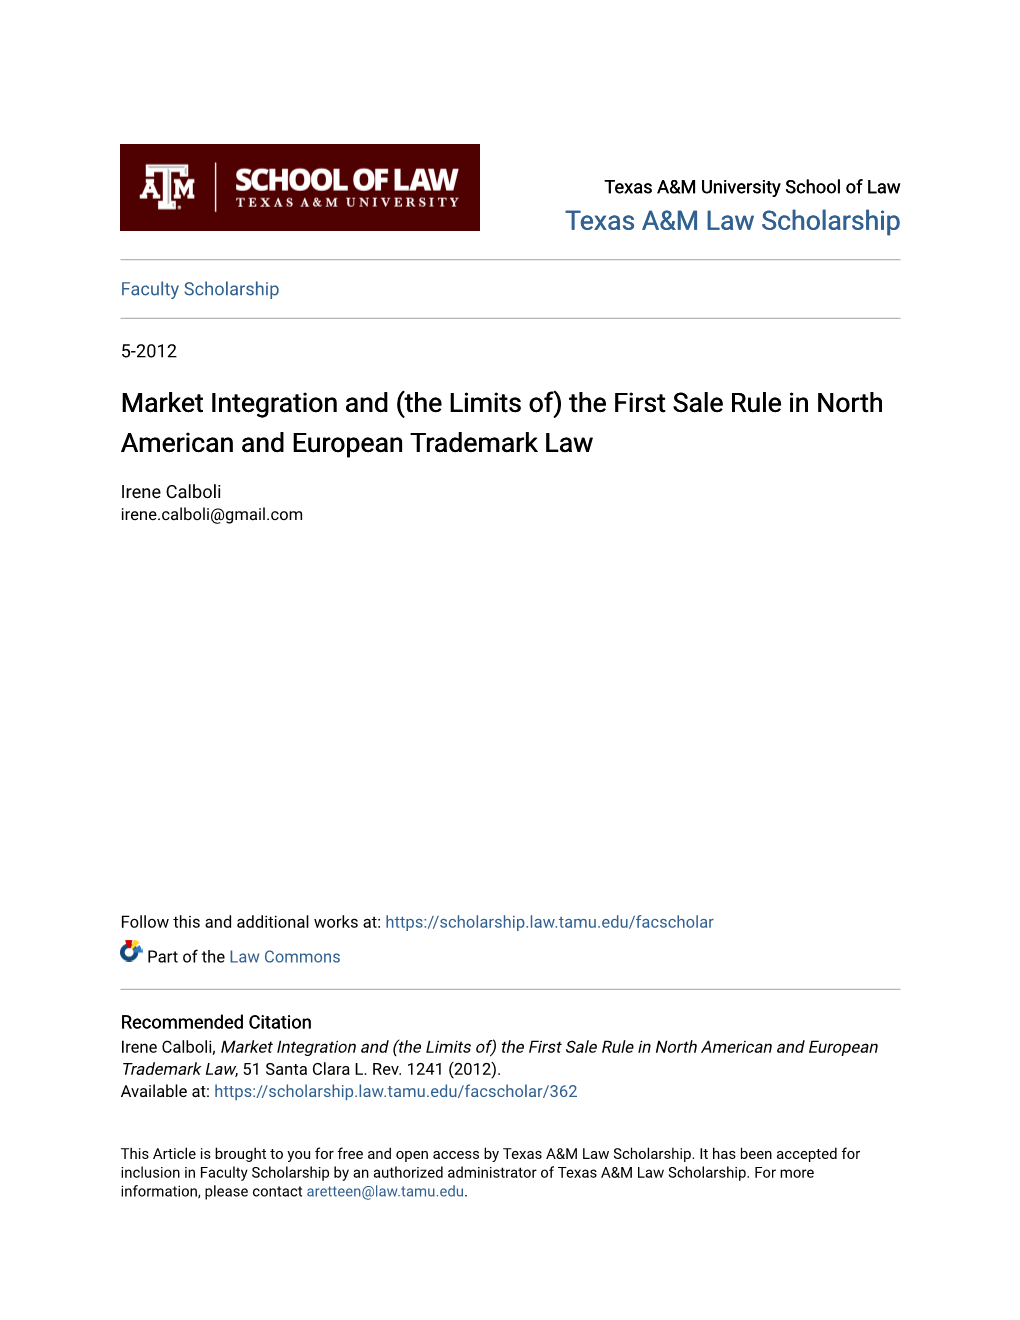 The First Sale Rule in North American and European Trademark Law